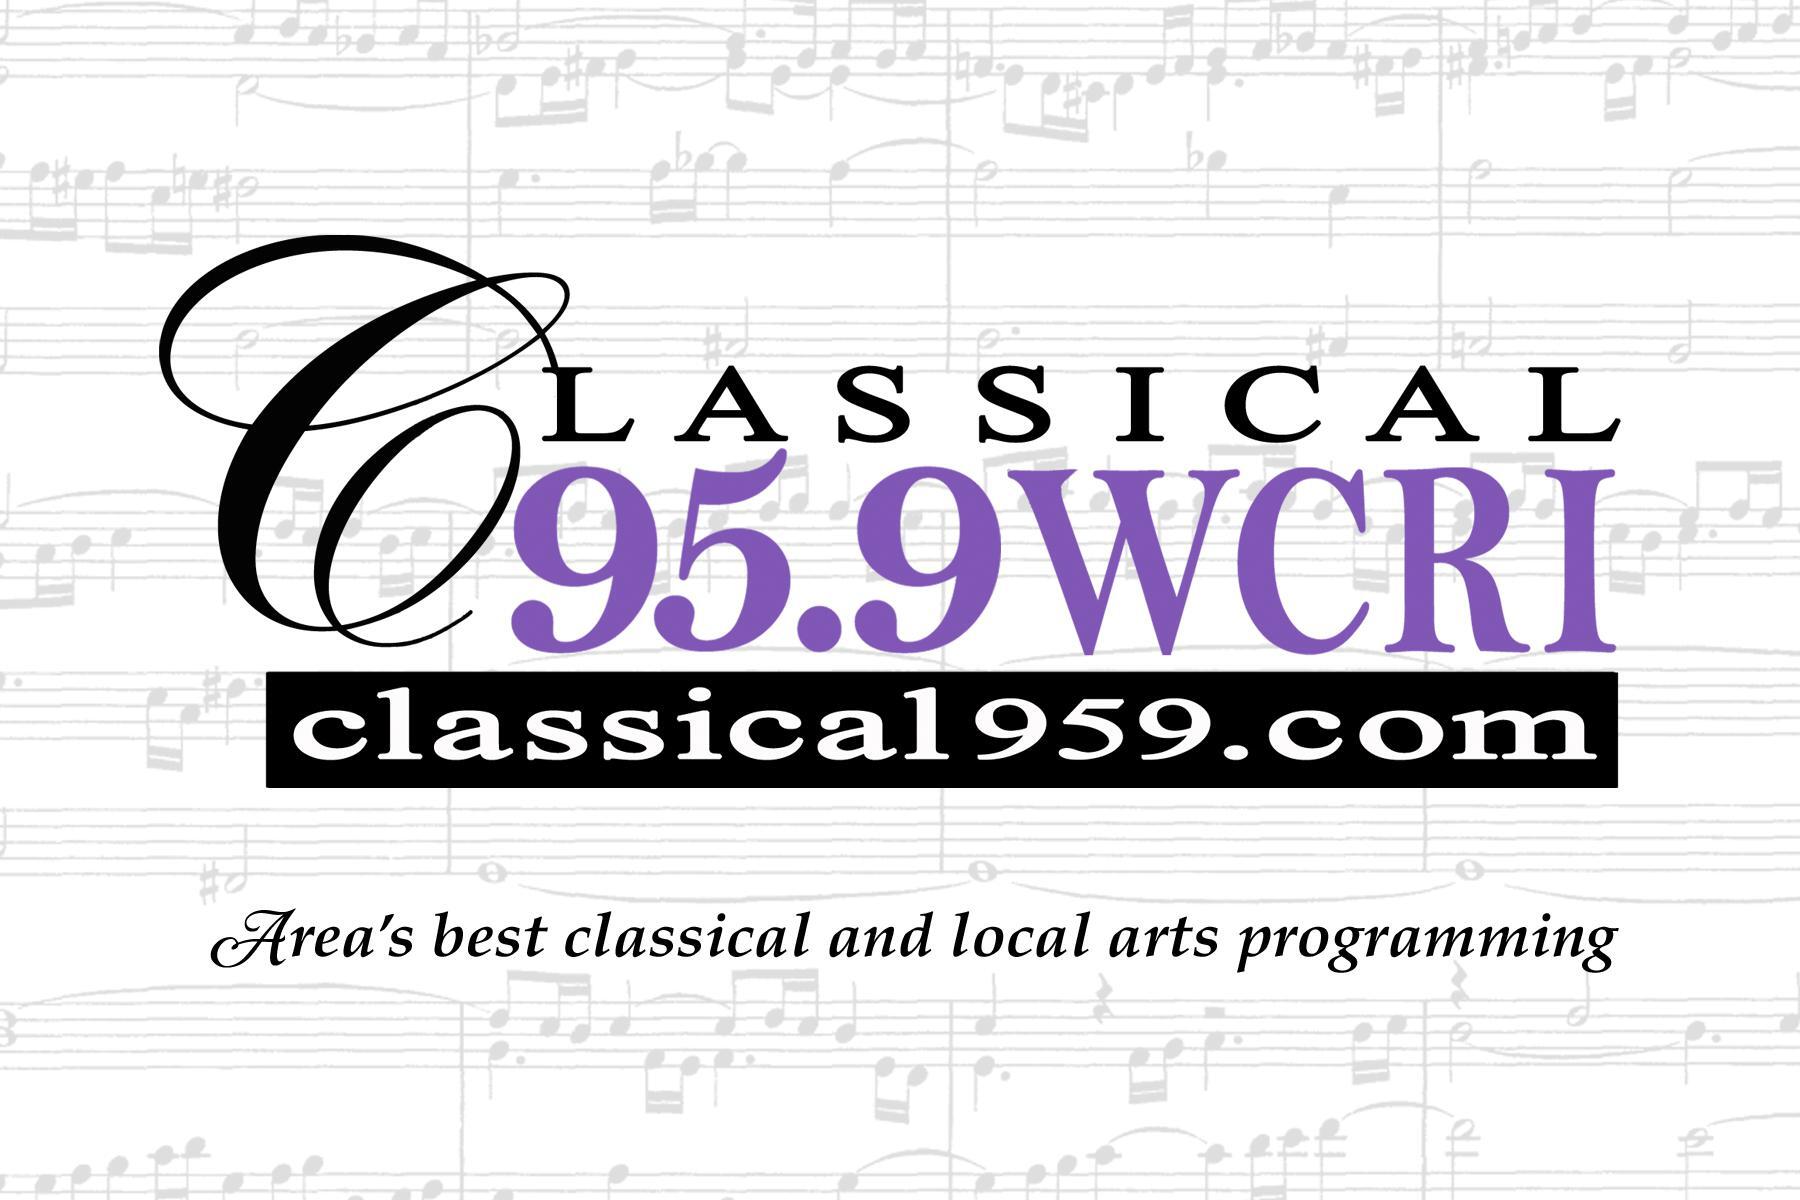 10-22-17   Chamber Music Concert on January 26th, 2018 -  WCRI’s Festival Series featuring The Newport Music Festival